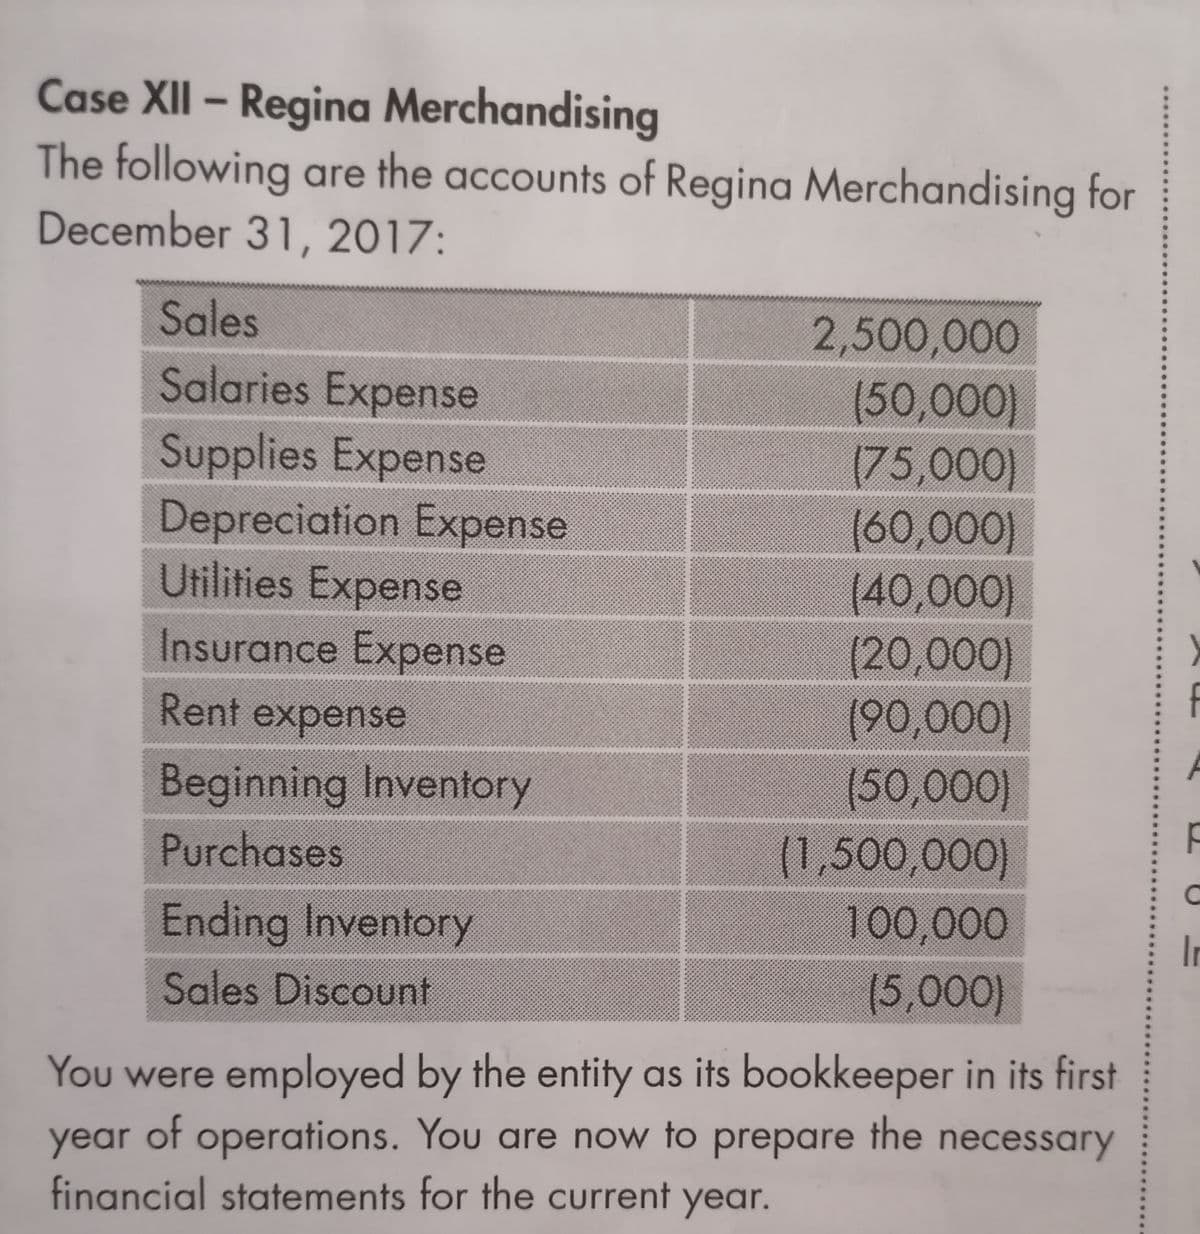 Case XII – Regina Merchandising
The following are the accounts of Regina Merchandising for
December 31, 2017:
Sales
2,500,000
Salaries Expense
Supplies Expense
Depreciation Expense
Utilities Expense
(50,000)
(75,000)
160,000)
(40,000)
Insurance Expense
(20,000)
(90,000)
(50,000)
(1,500,000)
100,000
(5,000)
Rent expense
Beginning Inventory
Purchases
Ending Inventory
In
Sales Discount
You were employed by the entity as its bookkeeper in its first
year of operations. You are now to prepare
financial statements for the current year.
the necessary
